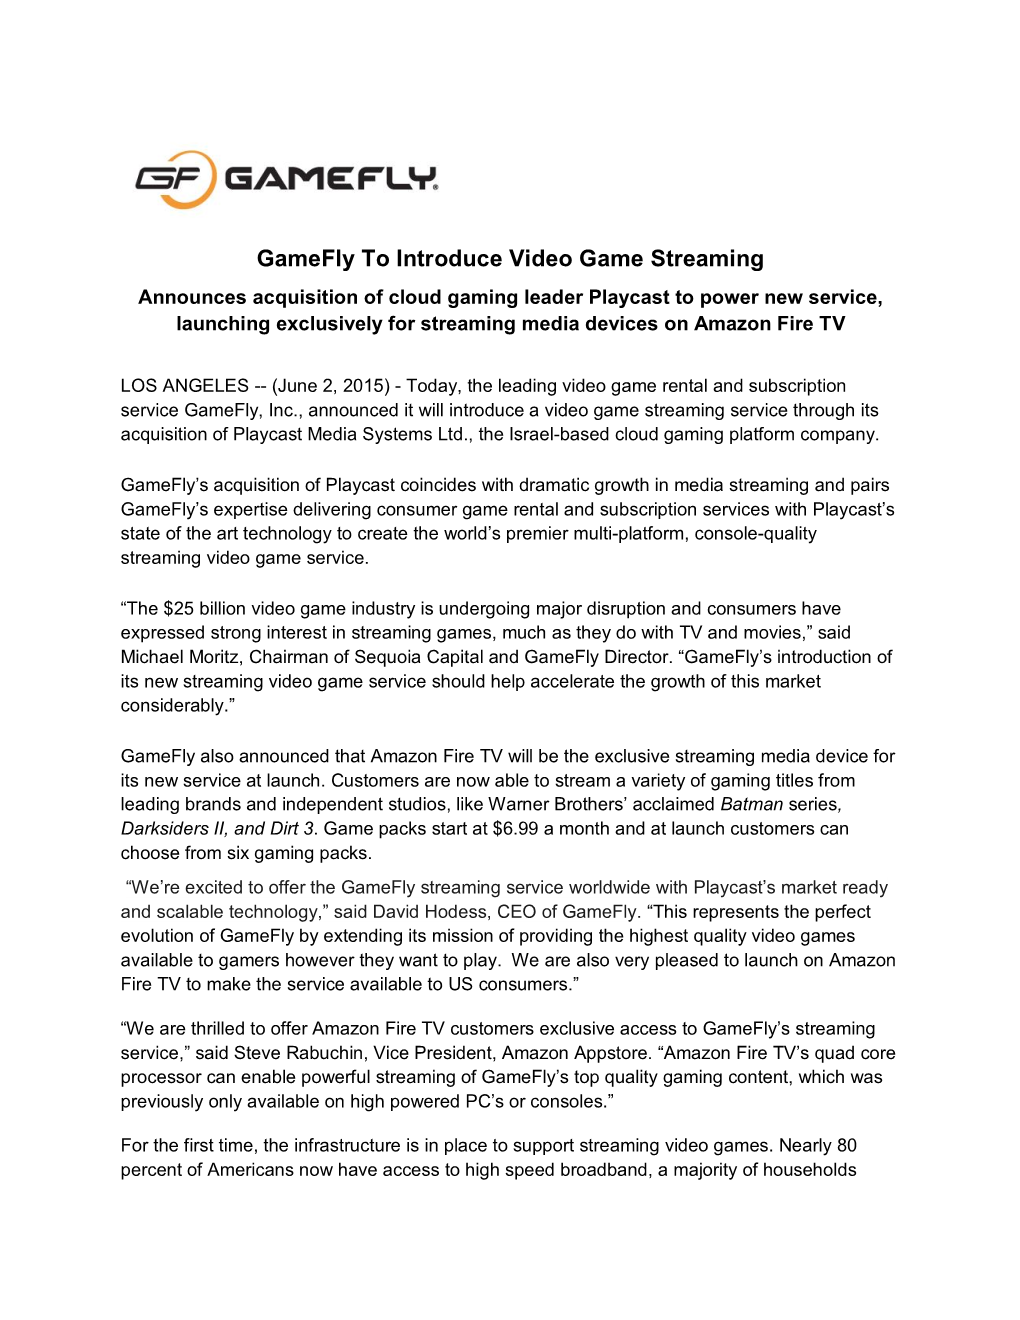 Gamefly to Introduce Video Game Streaming